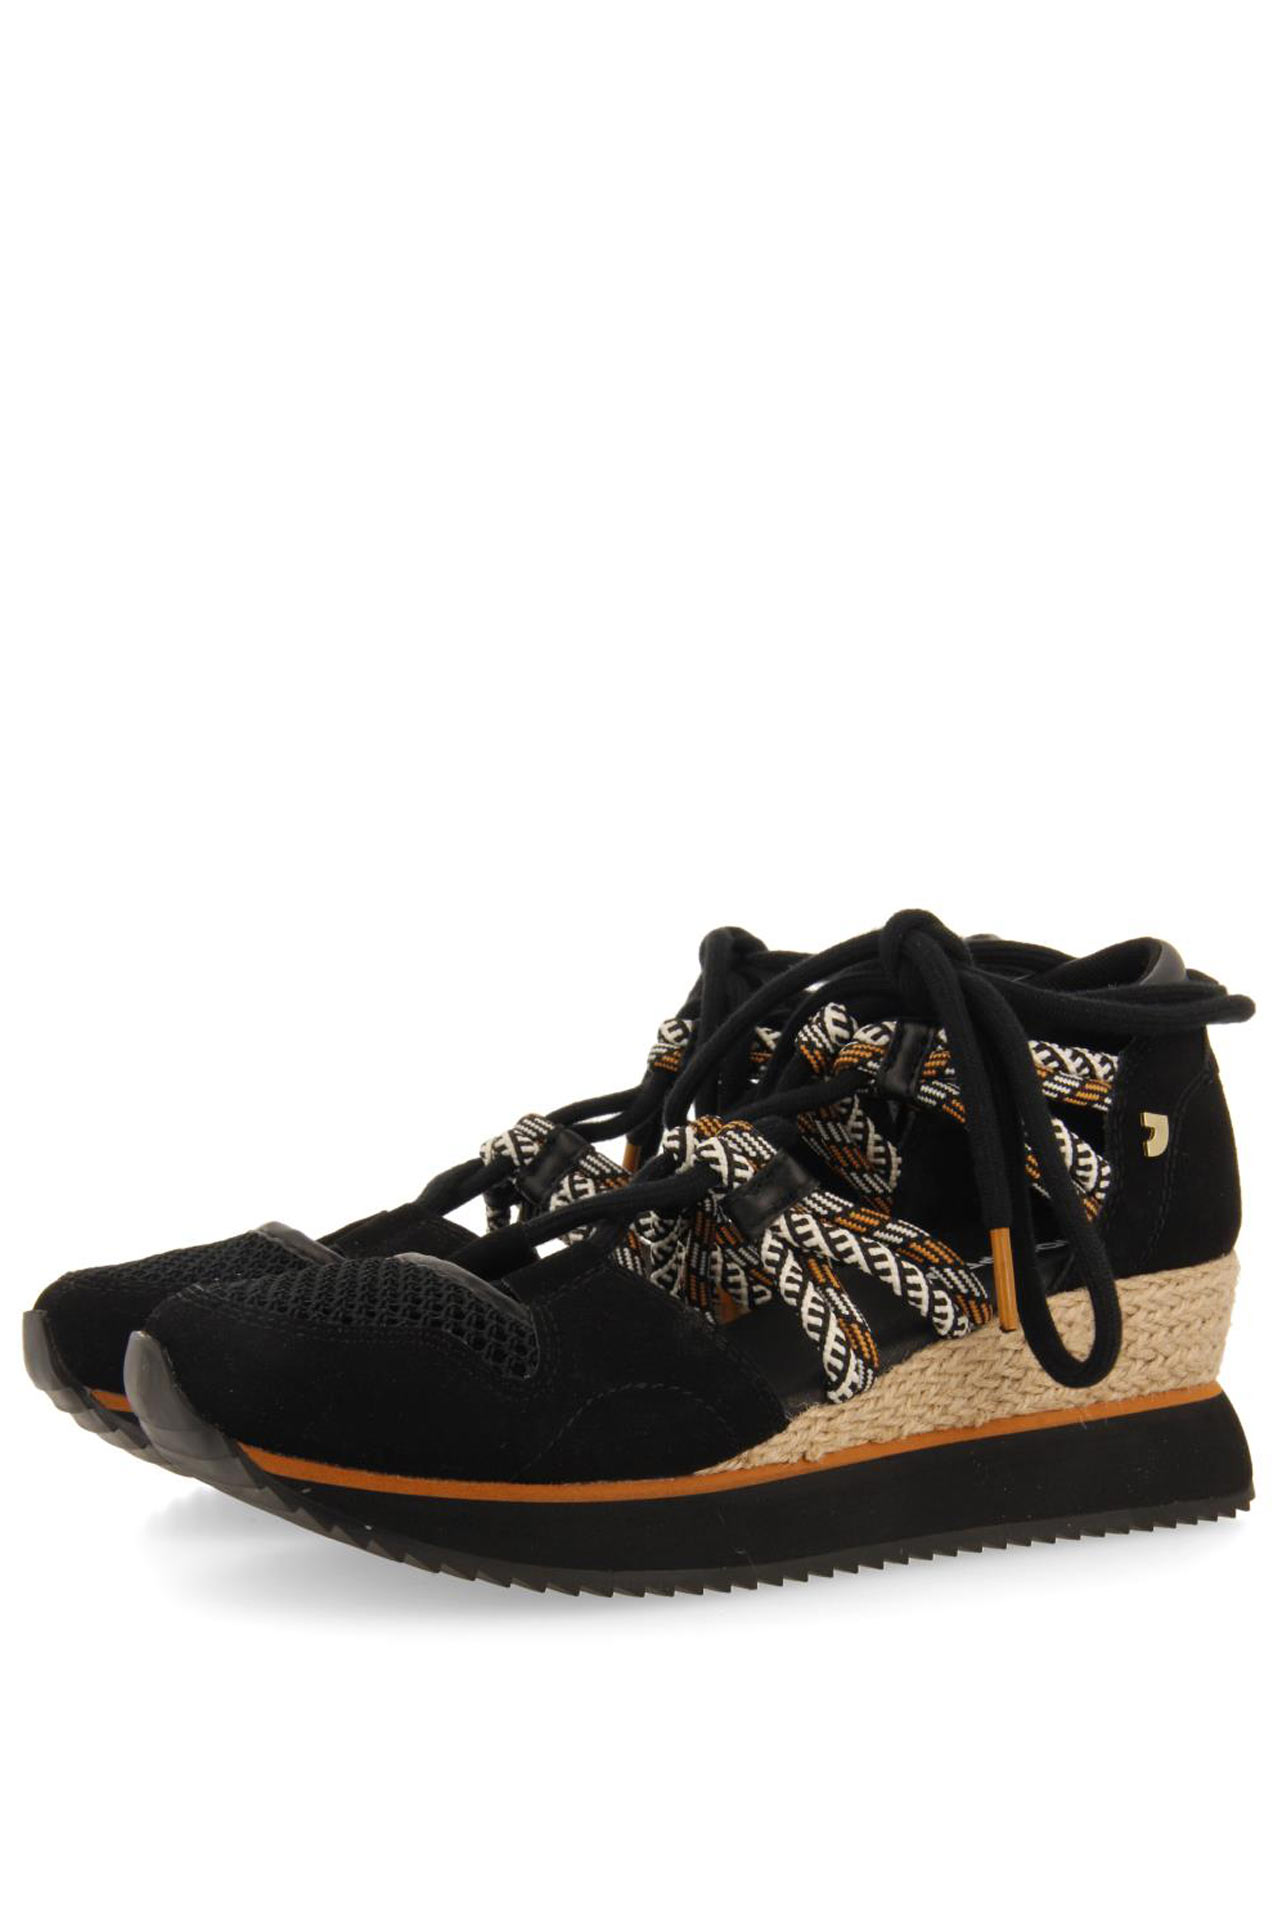 GIOSEPPO IONA BLACK OPEN SNEAKERS ESPADRILLE TYPE WITH WEDGE